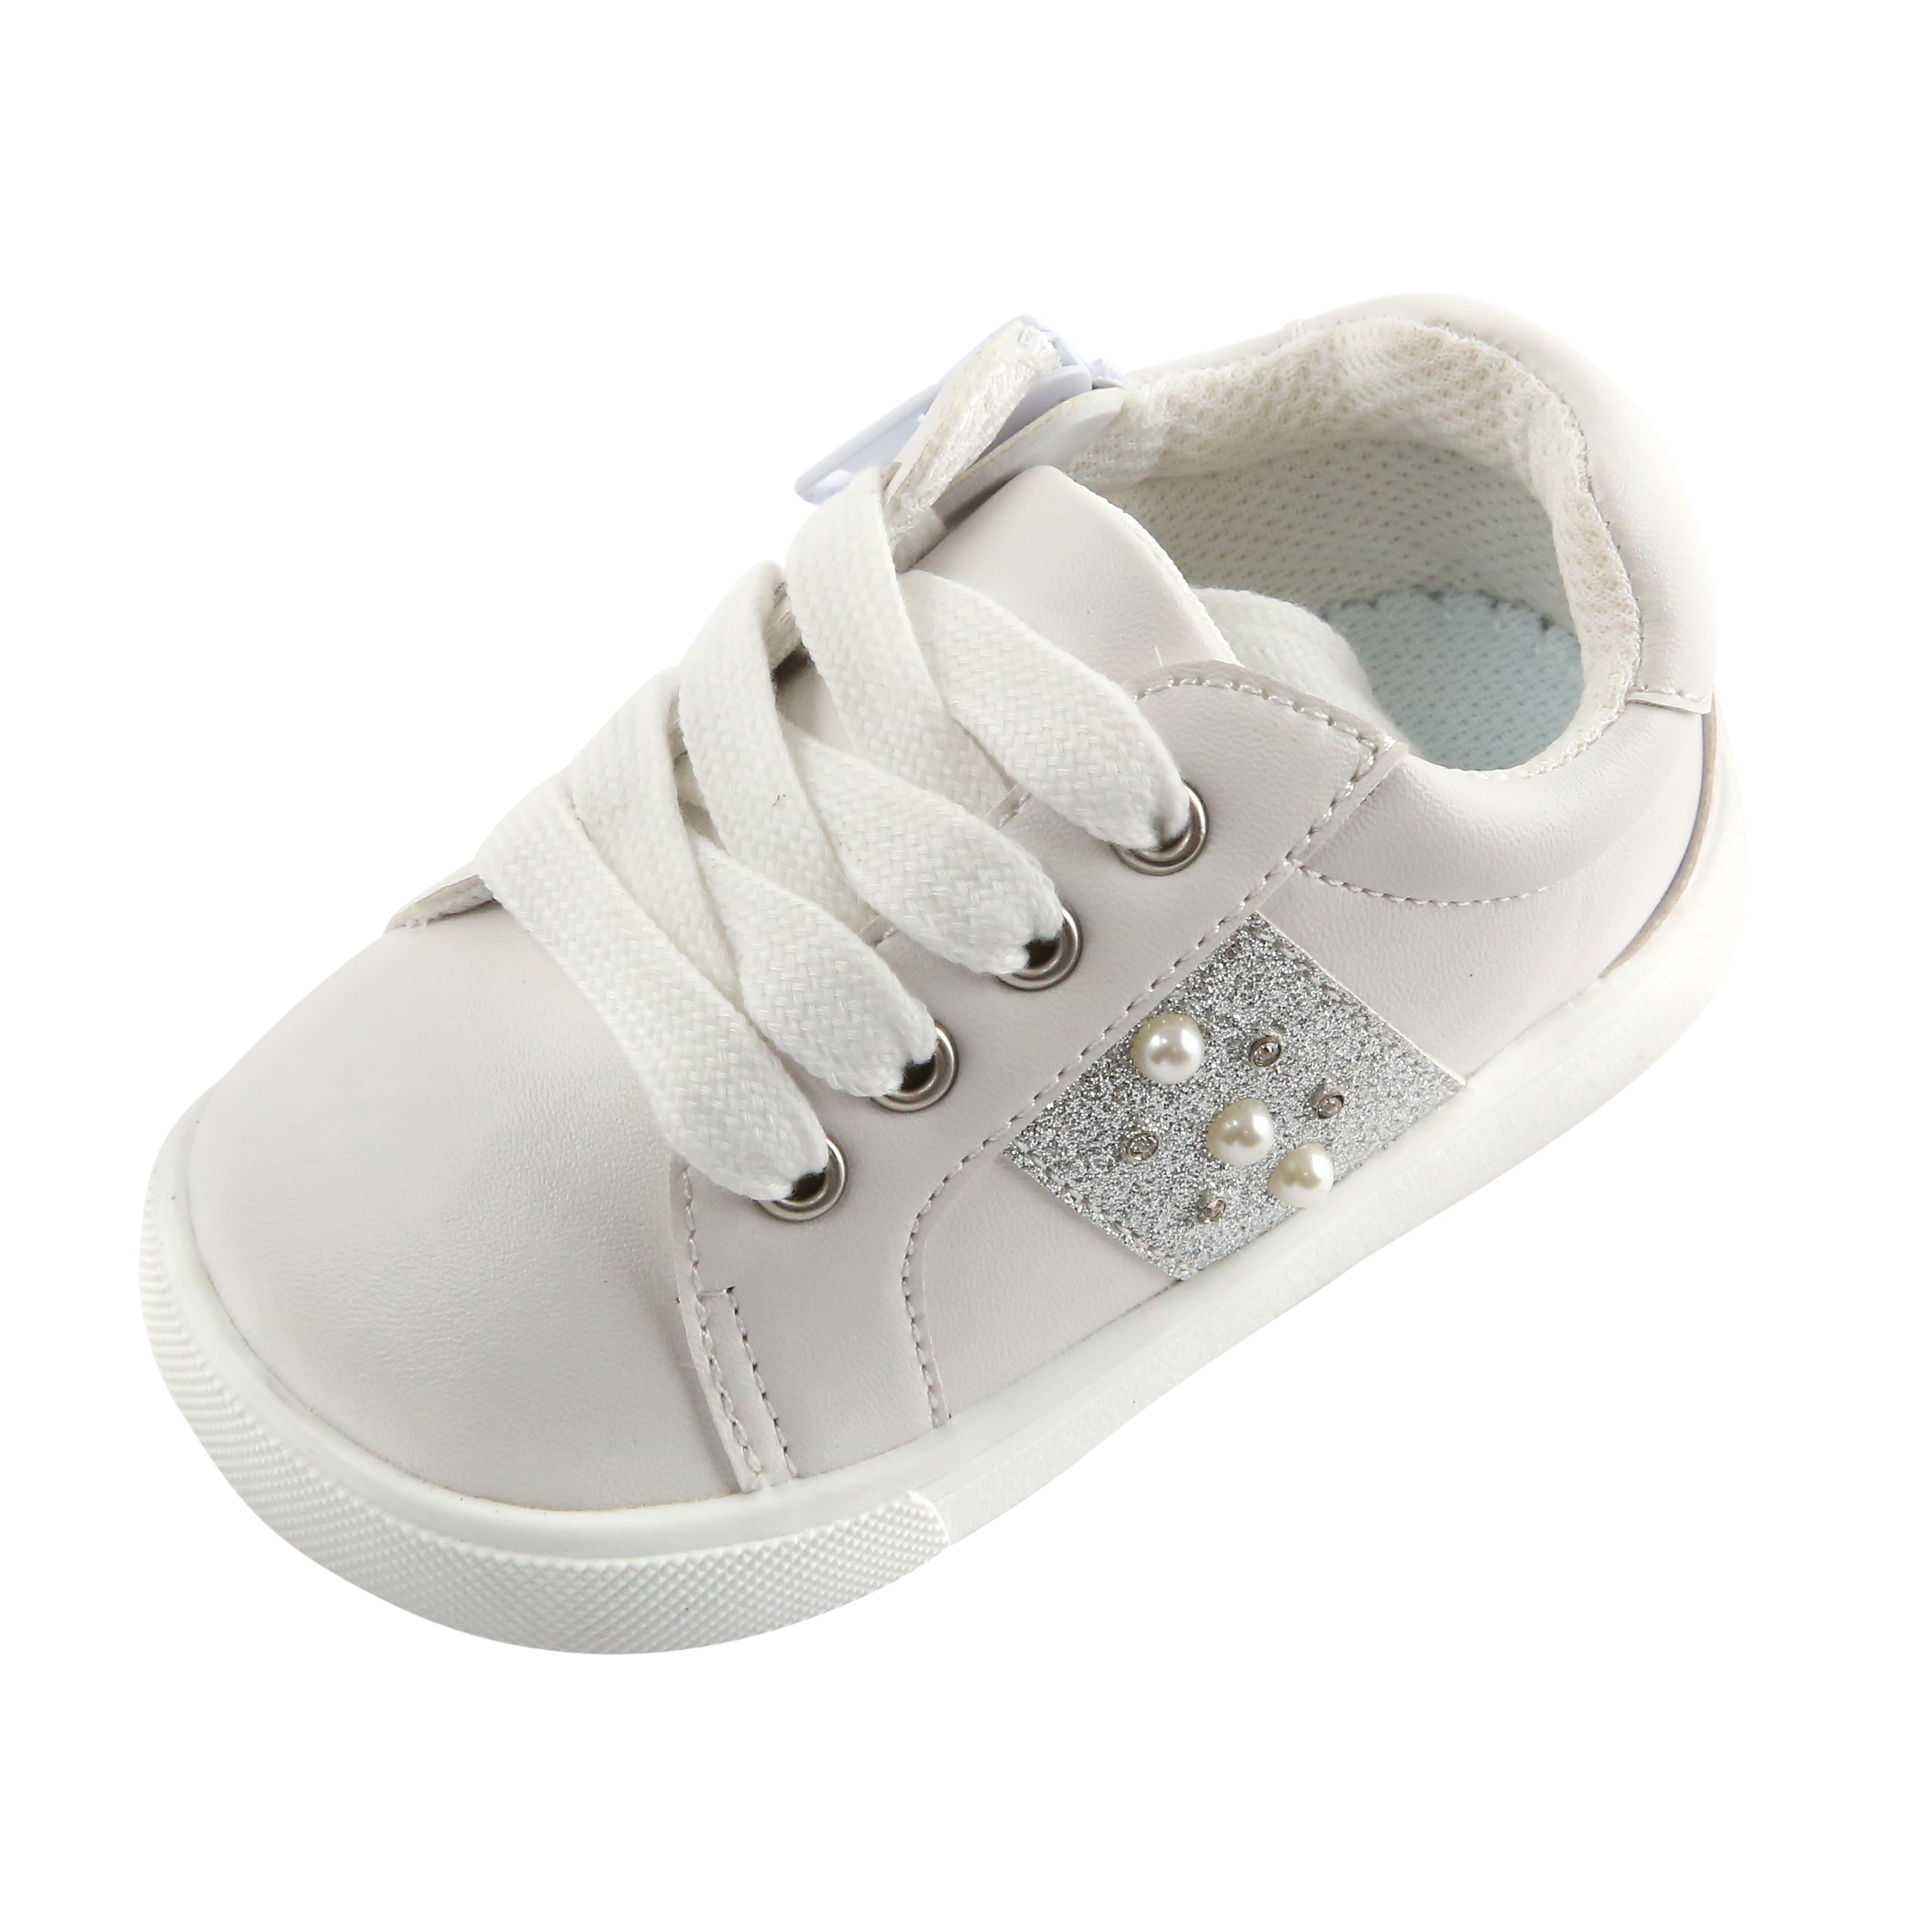 bebe Kids Girls High Top Velcro Strap Sneakers Shoes With Heart